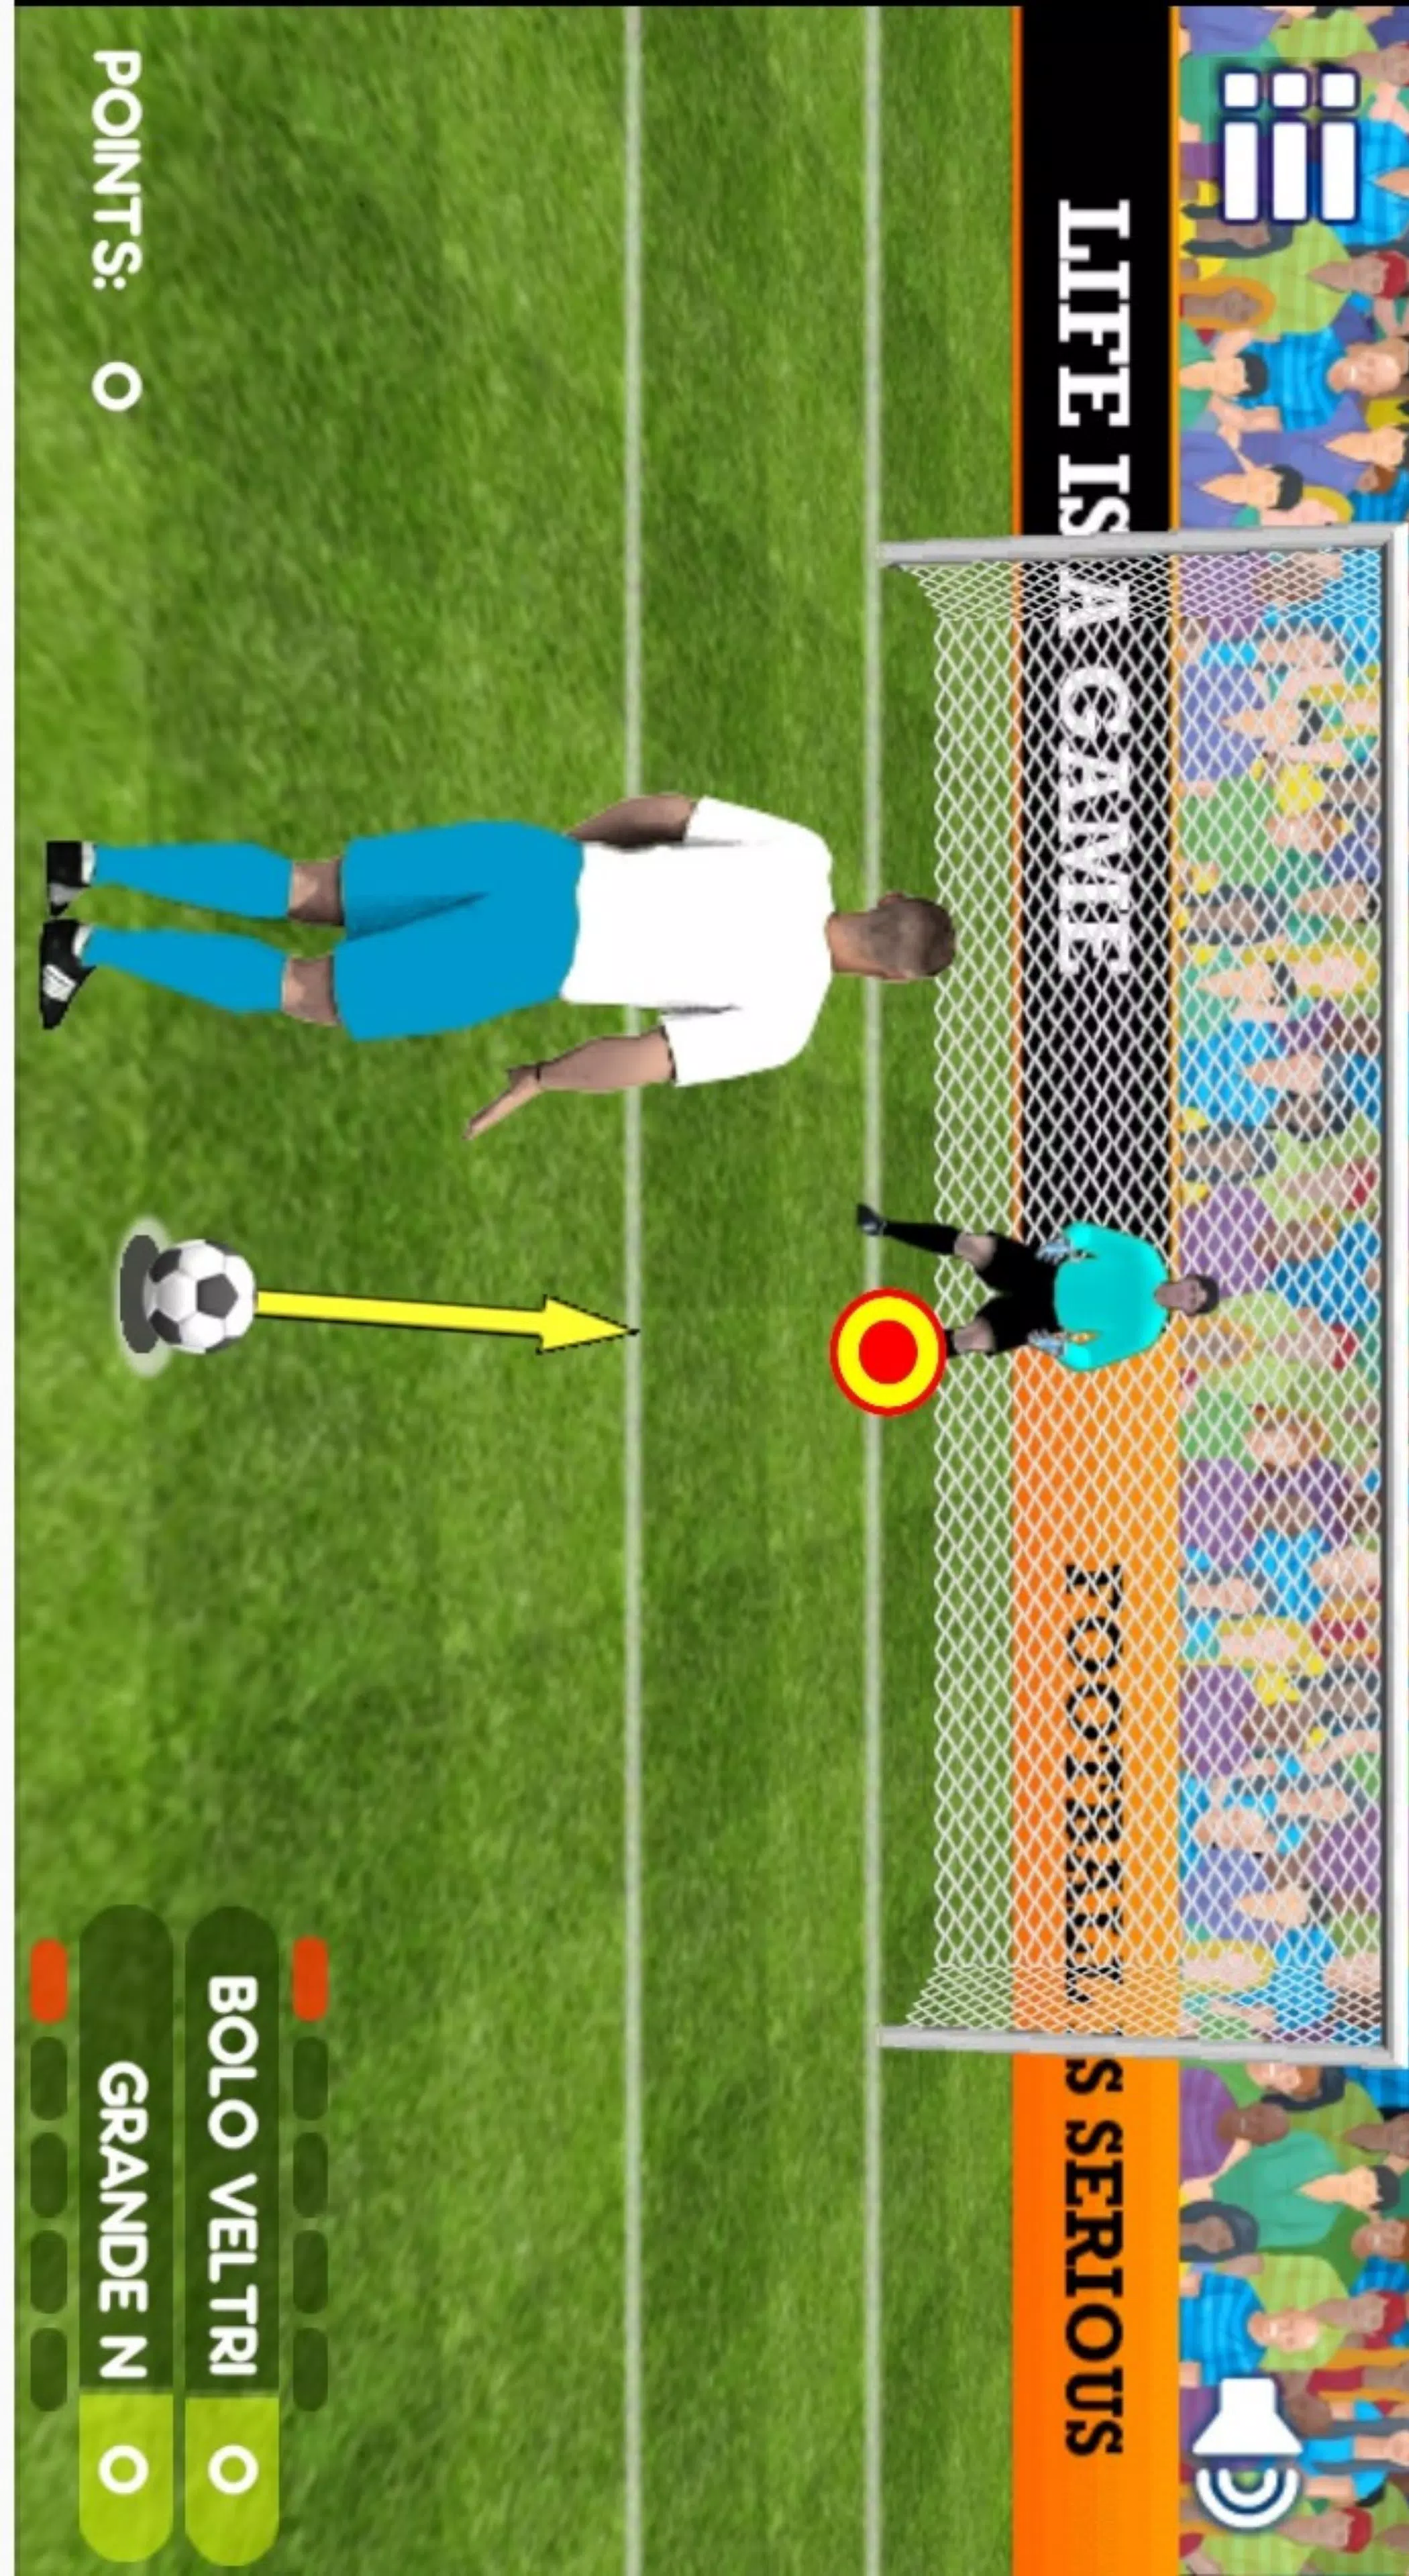 Penalty shooter 2 Apk Download for Android- Latest version 1.5-  com.FreeTimeApps.PenaltyShooter